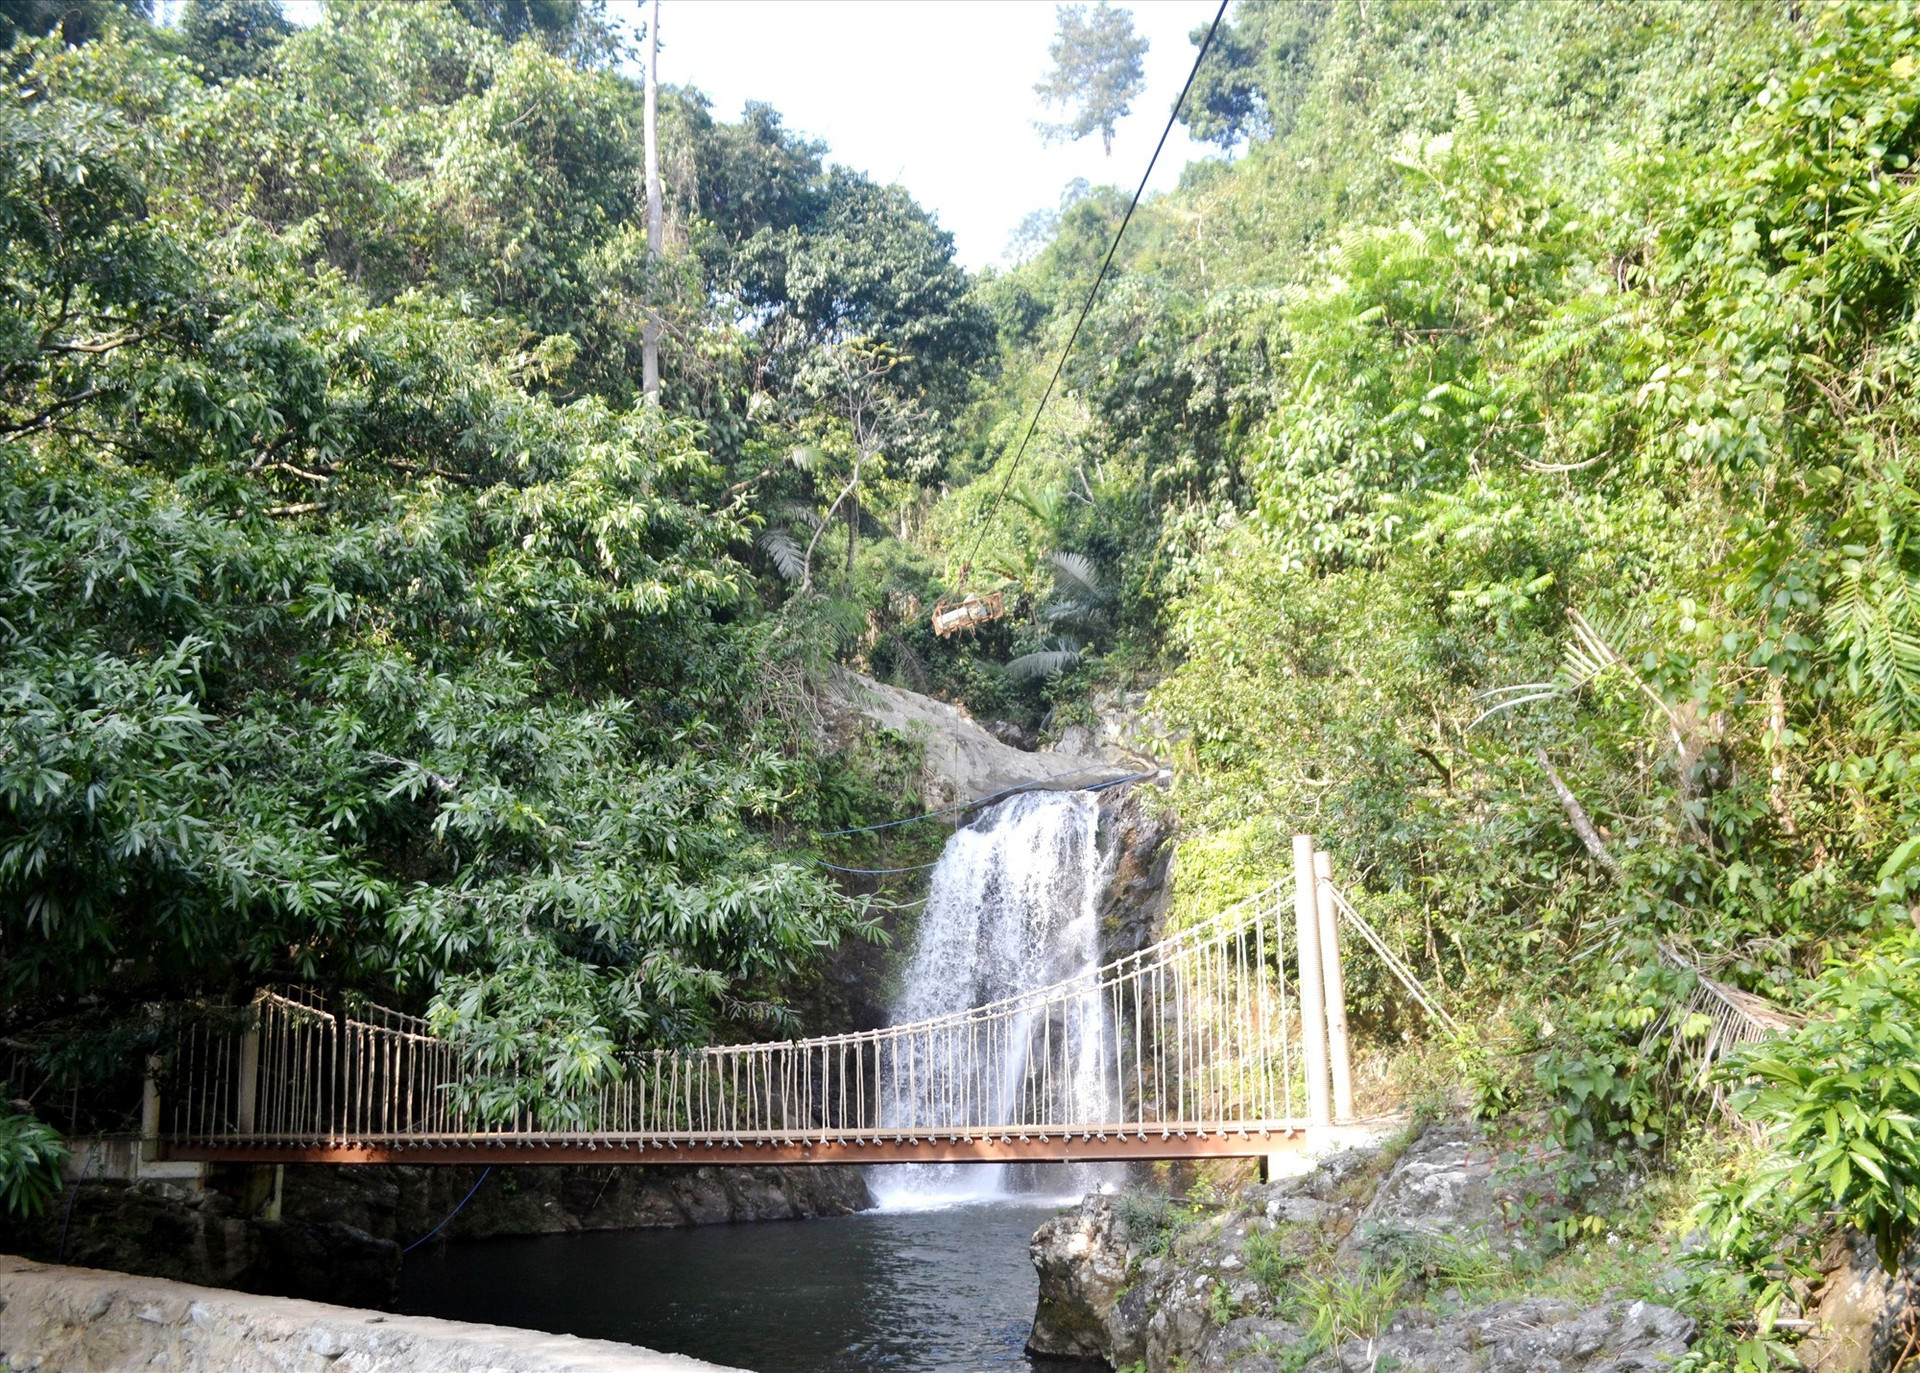 1st waterfall in Dong Giang Cong Troi ecotourism site